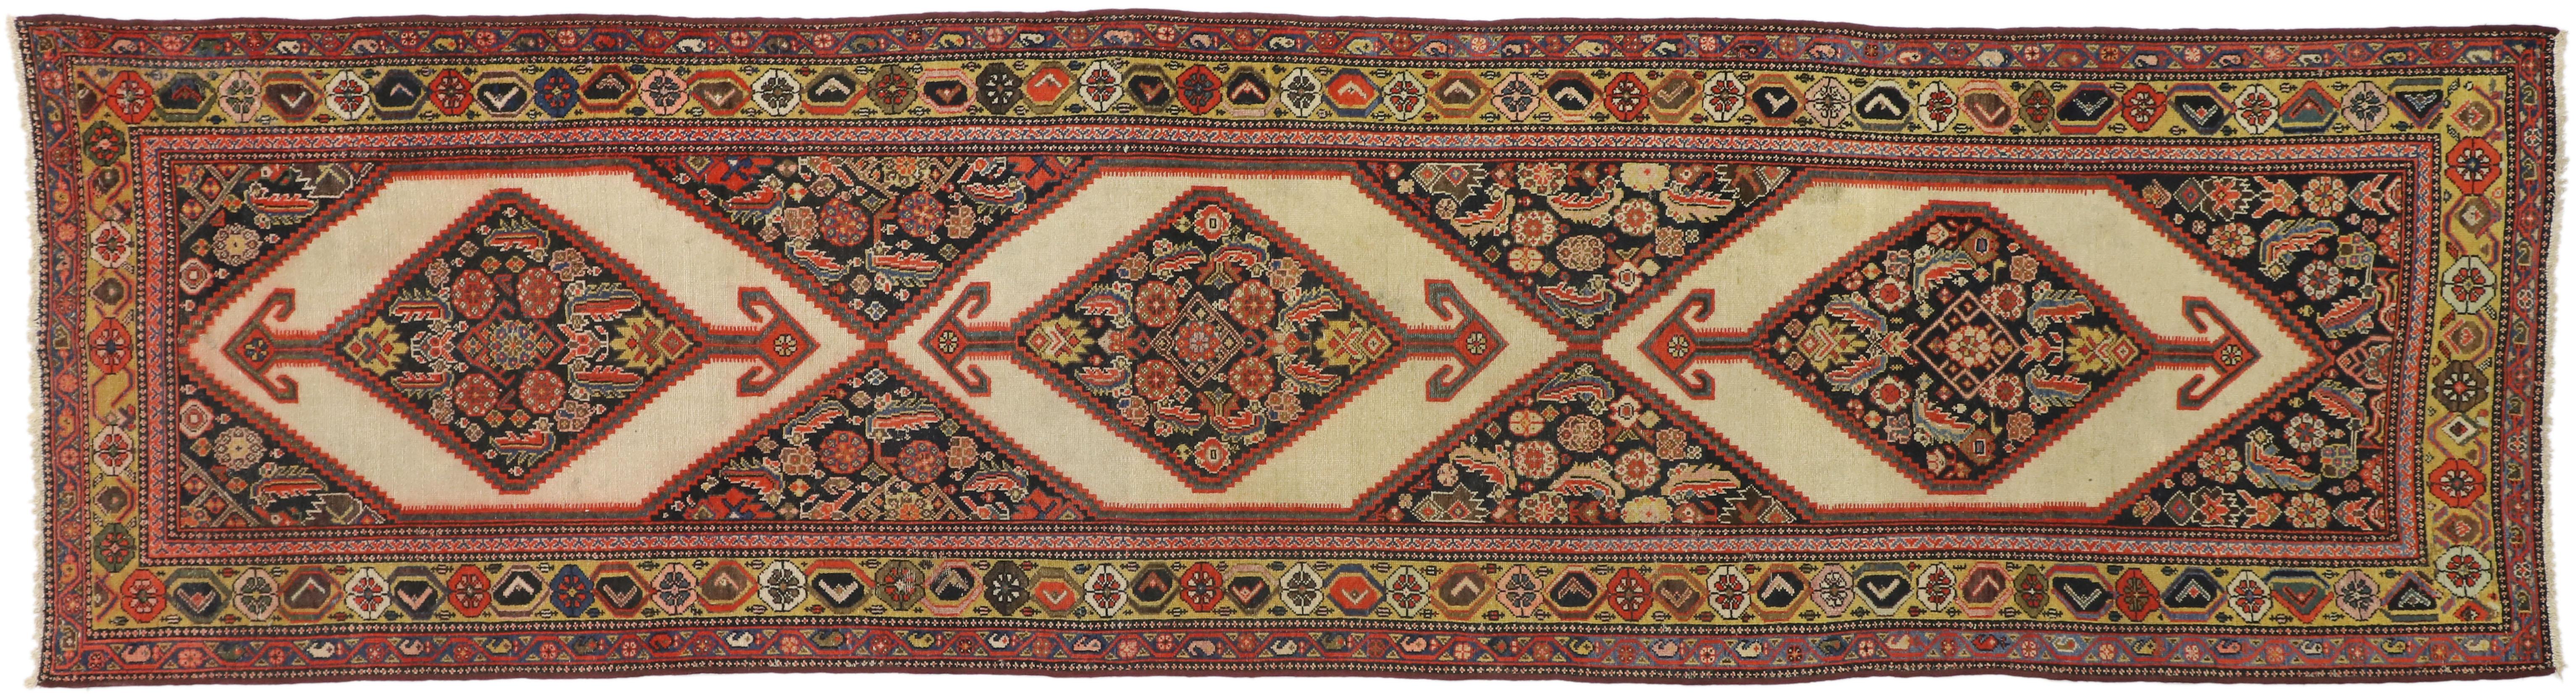 Antique Persian Malayer Runner with Tudor Manor House Style For Sale 3